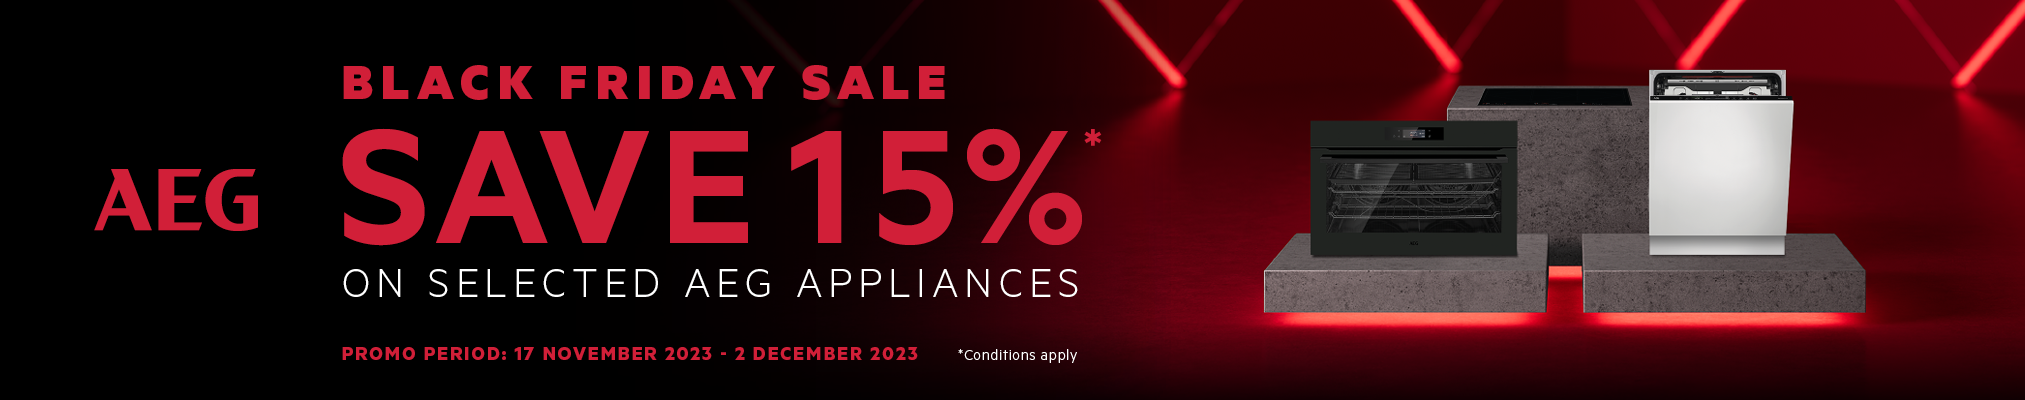 Save Up To 15%* On Selected Appliances During AEG Black Friday Sale